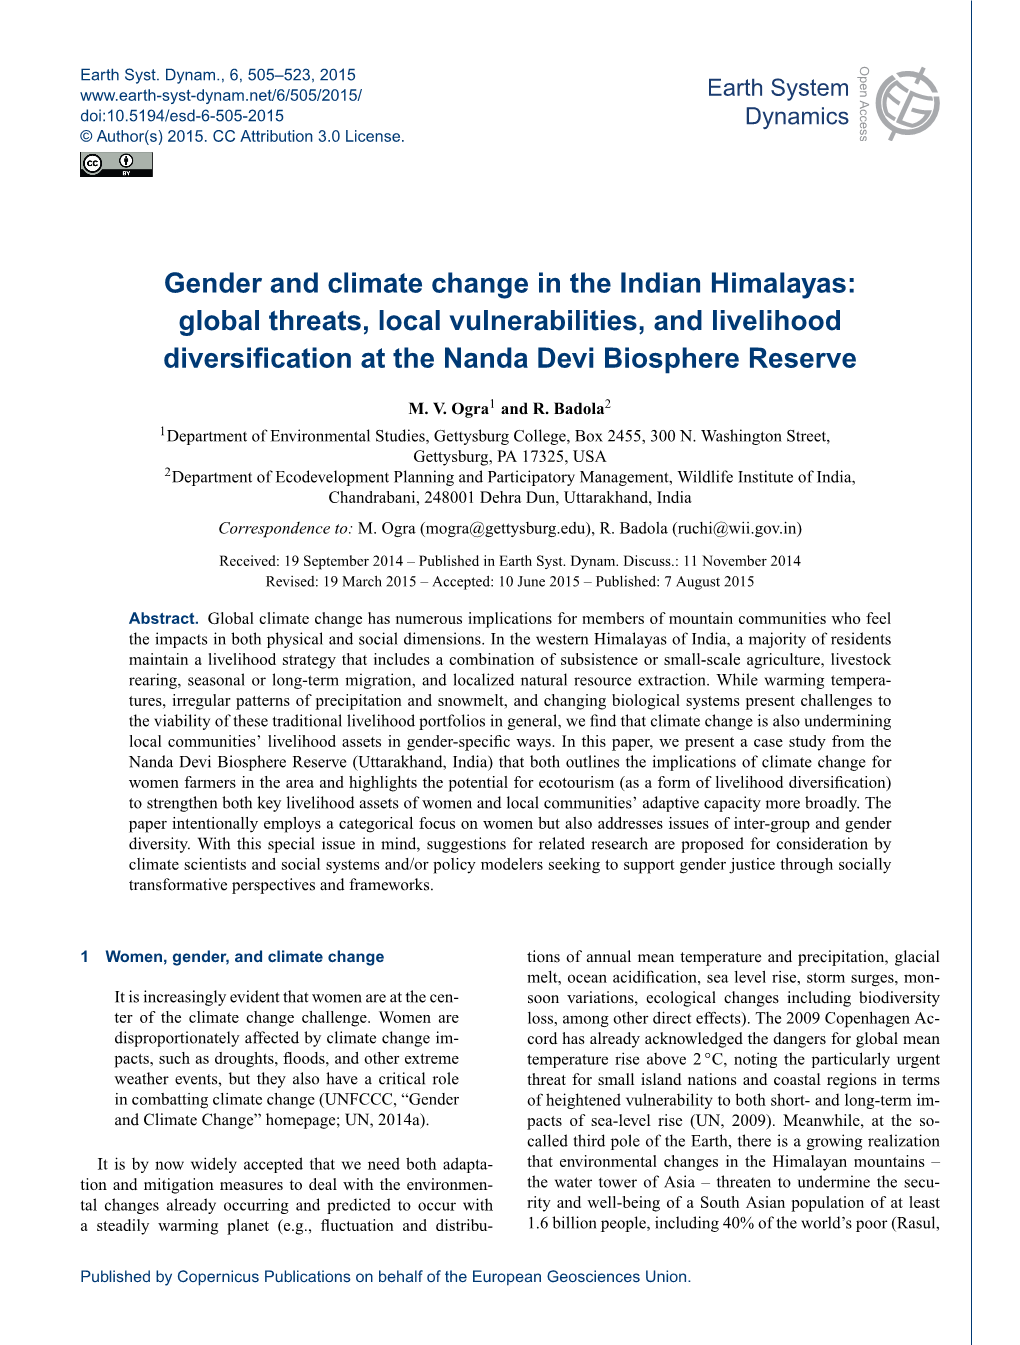 Gender and Climate Change in the Indian Himalayas: Global Threats, Local Vulnerabilities, and Livelihood Diversiﬁcation at the Nanda Devi Biosphere Reserve